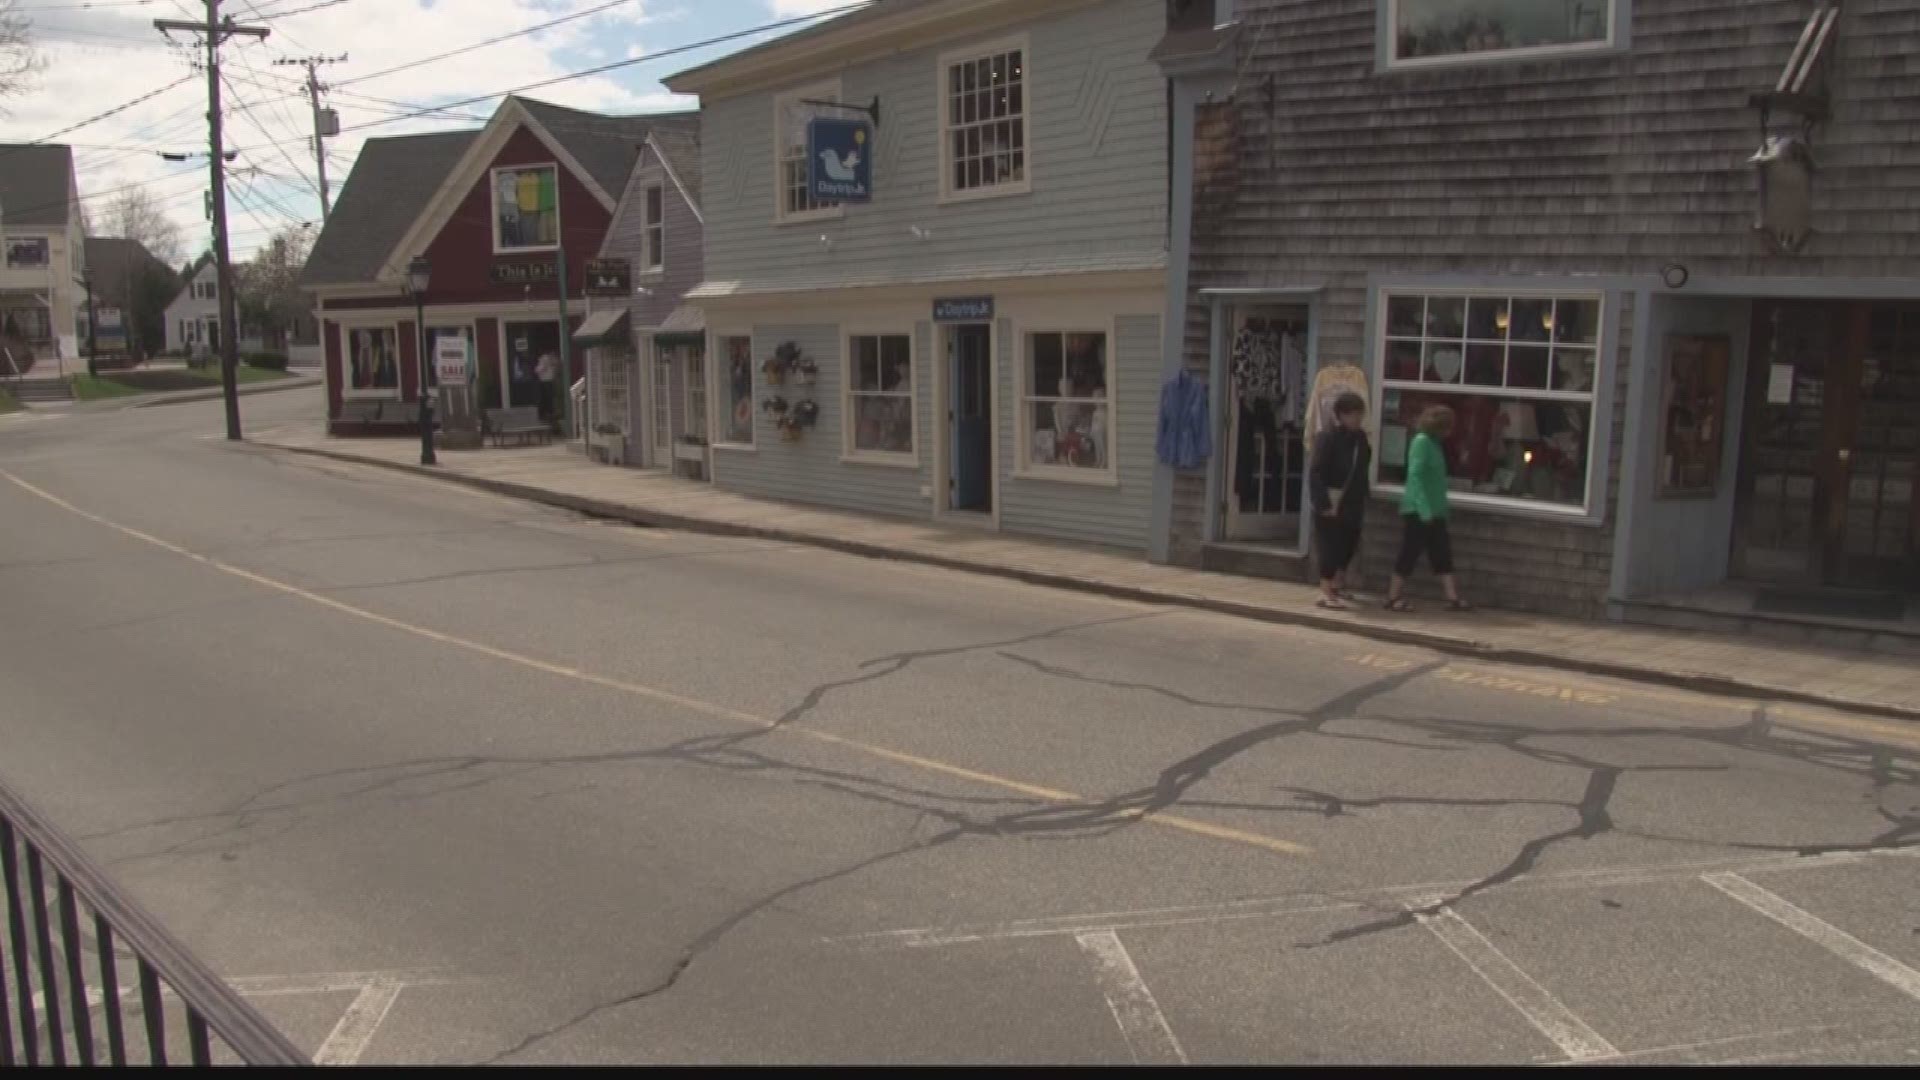 Each day of the Kennebunkport Festival, different businesses offer special dining deals with a portion of the money going to local not-for-profit organizations